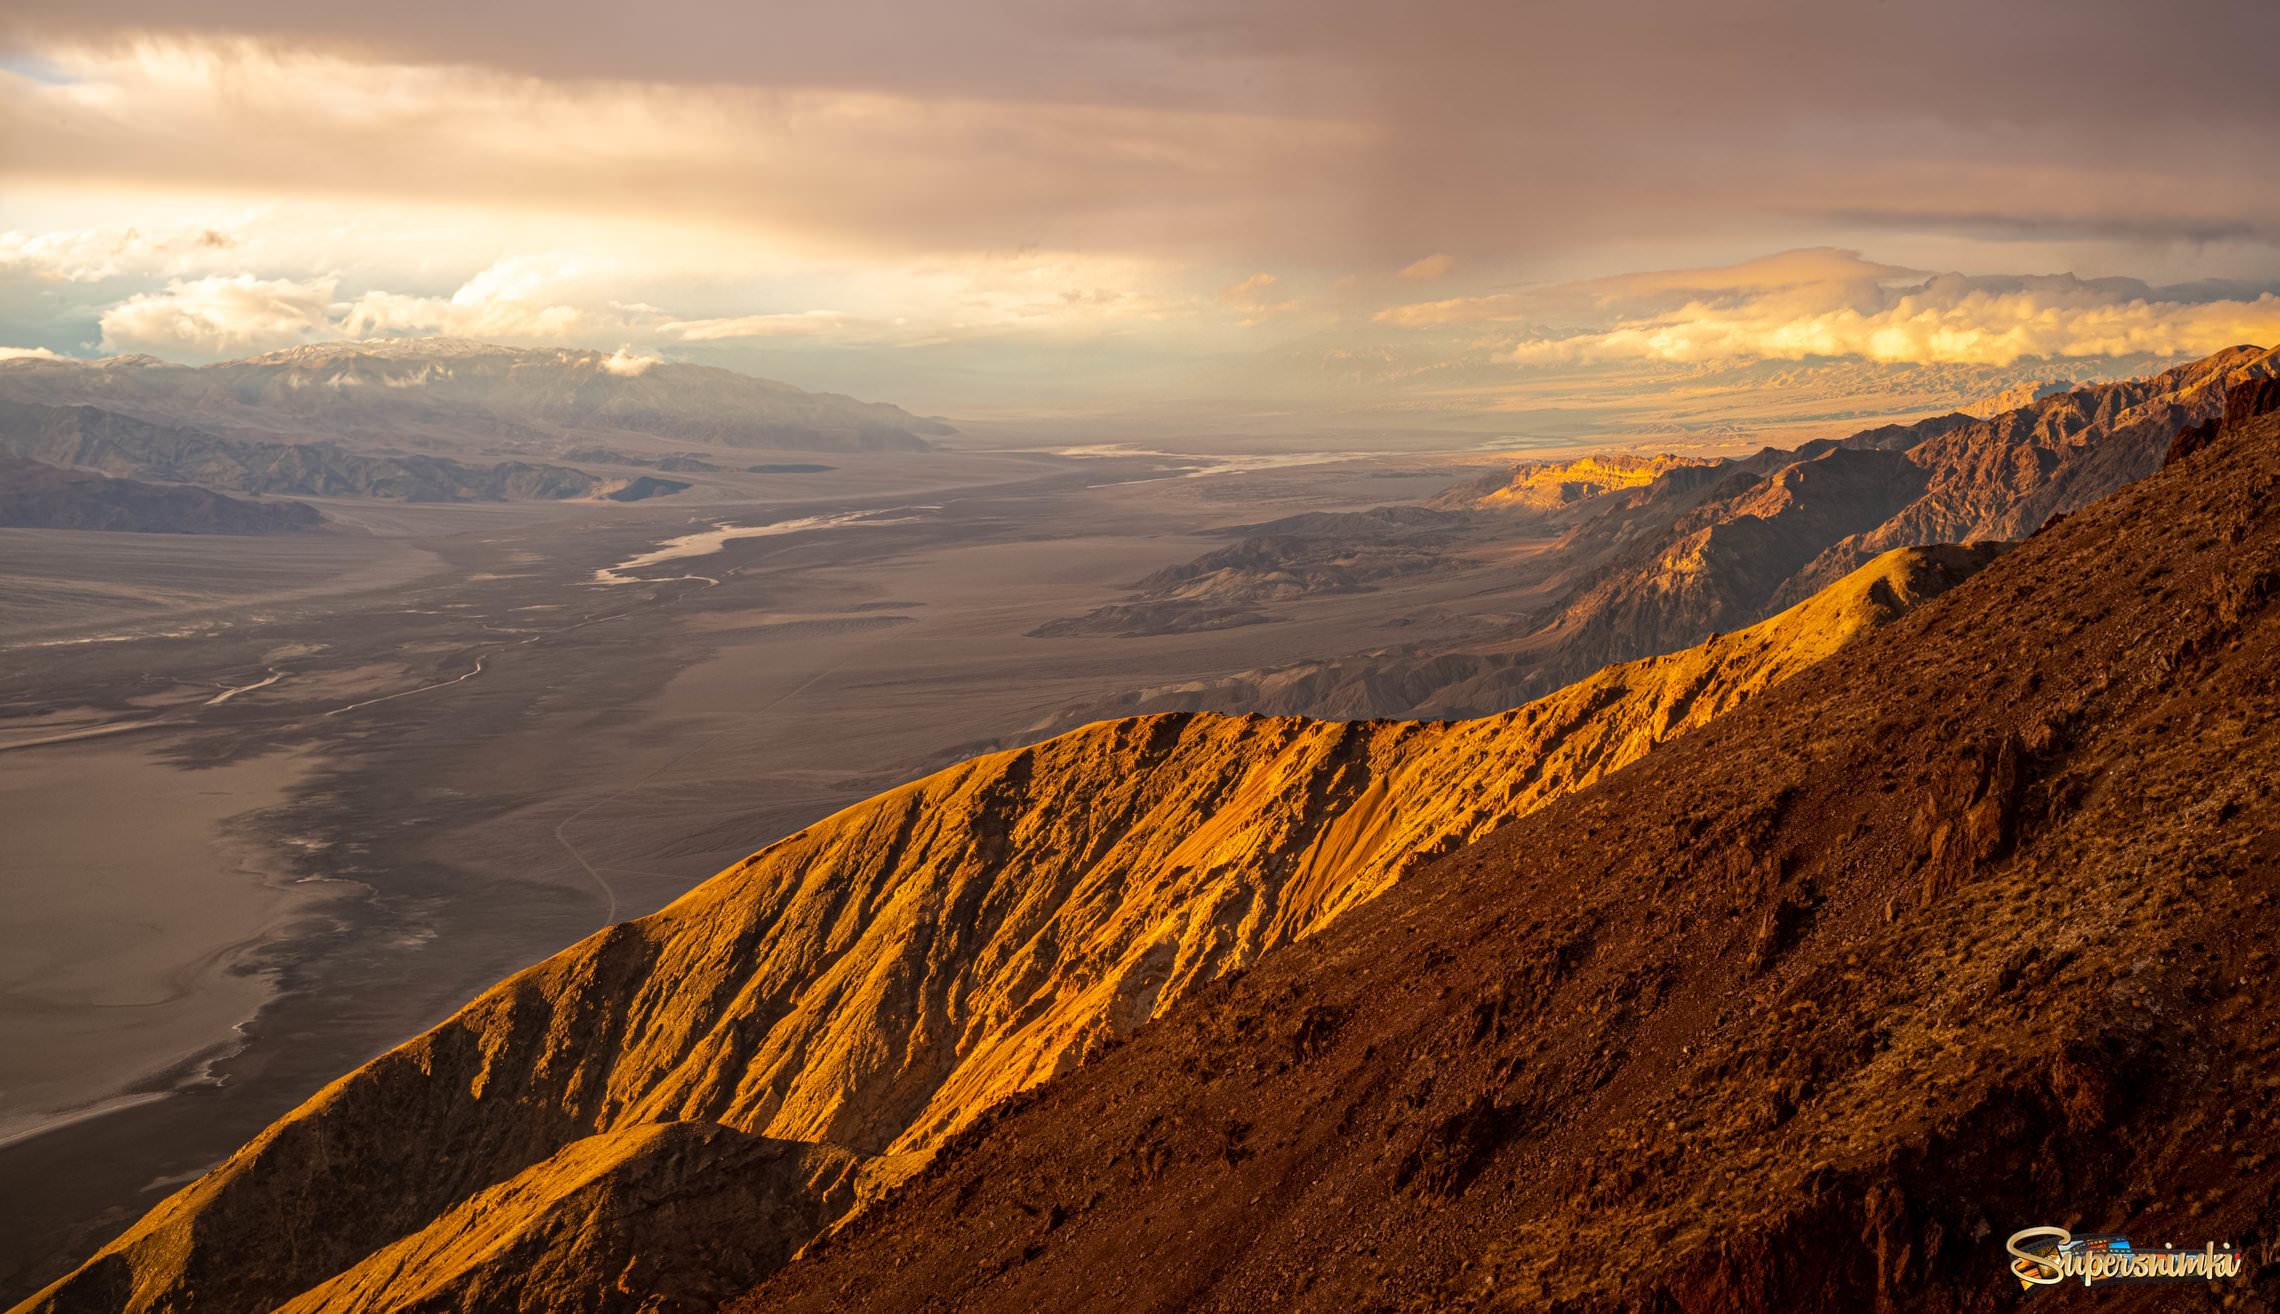 Sunset in Death Valley, California